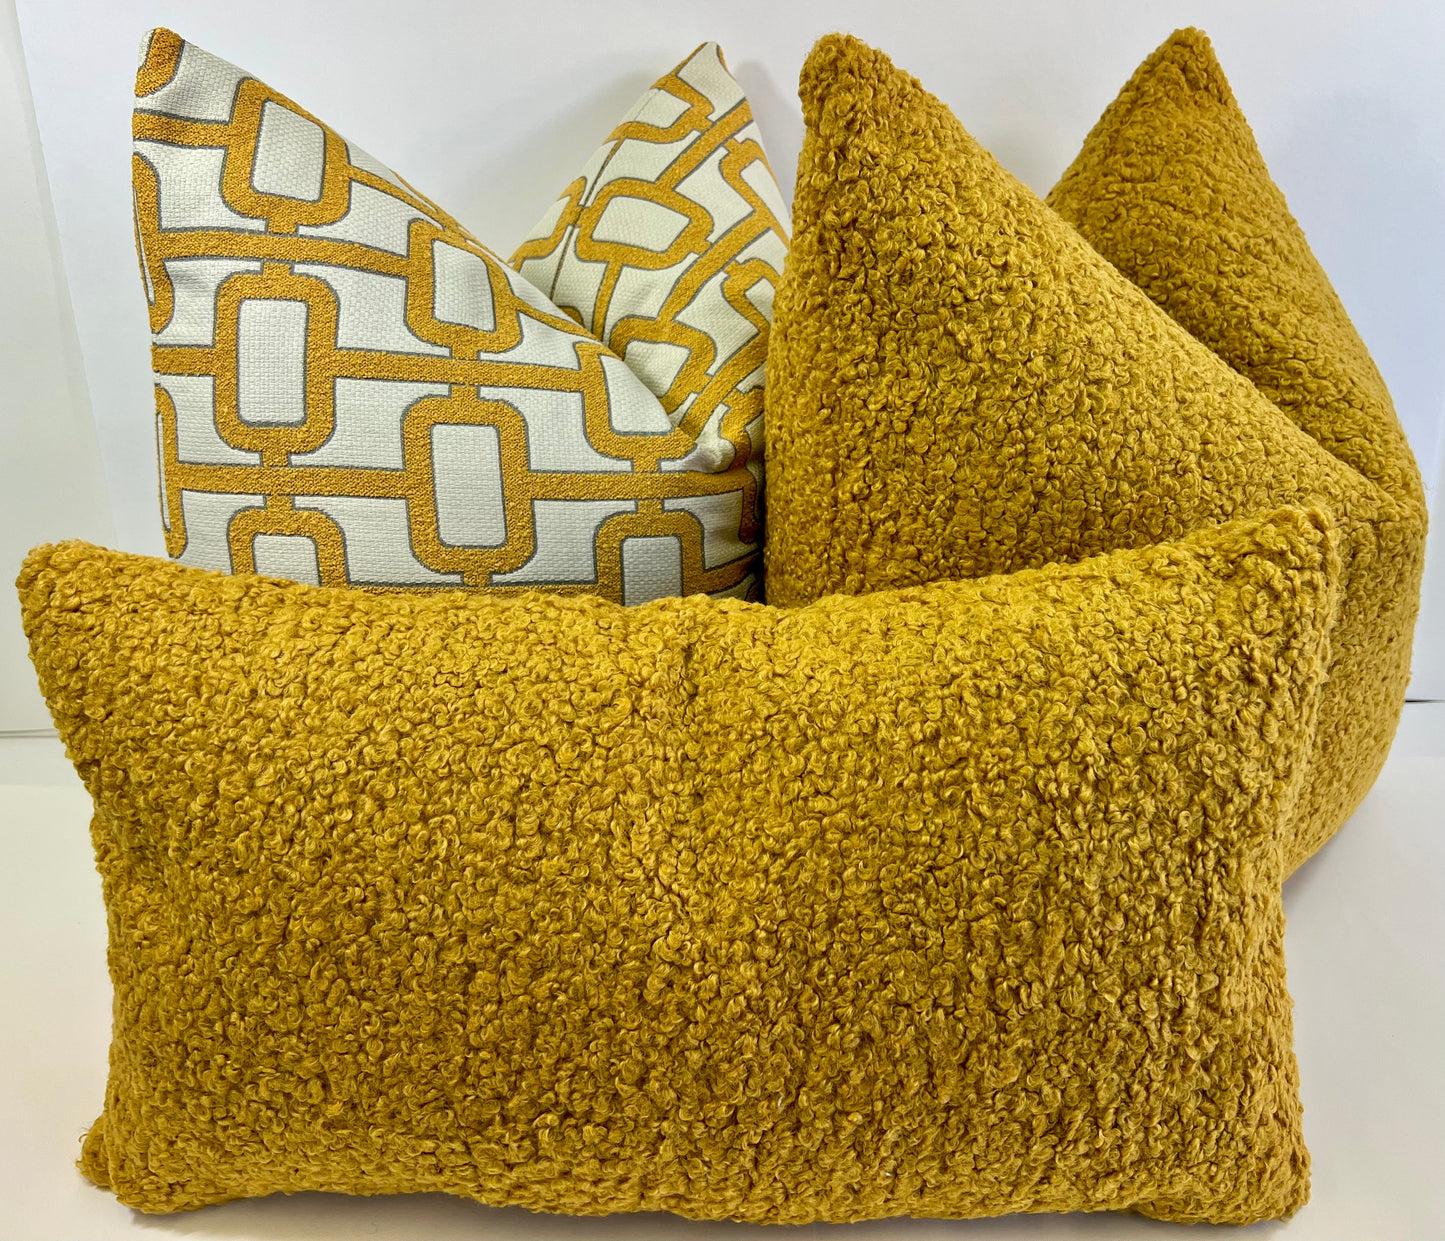 Luxury Lumbar Pillow - 24" x 14" -  Poodle Dijon; Poodle like hair fiber, very soft to the touch.